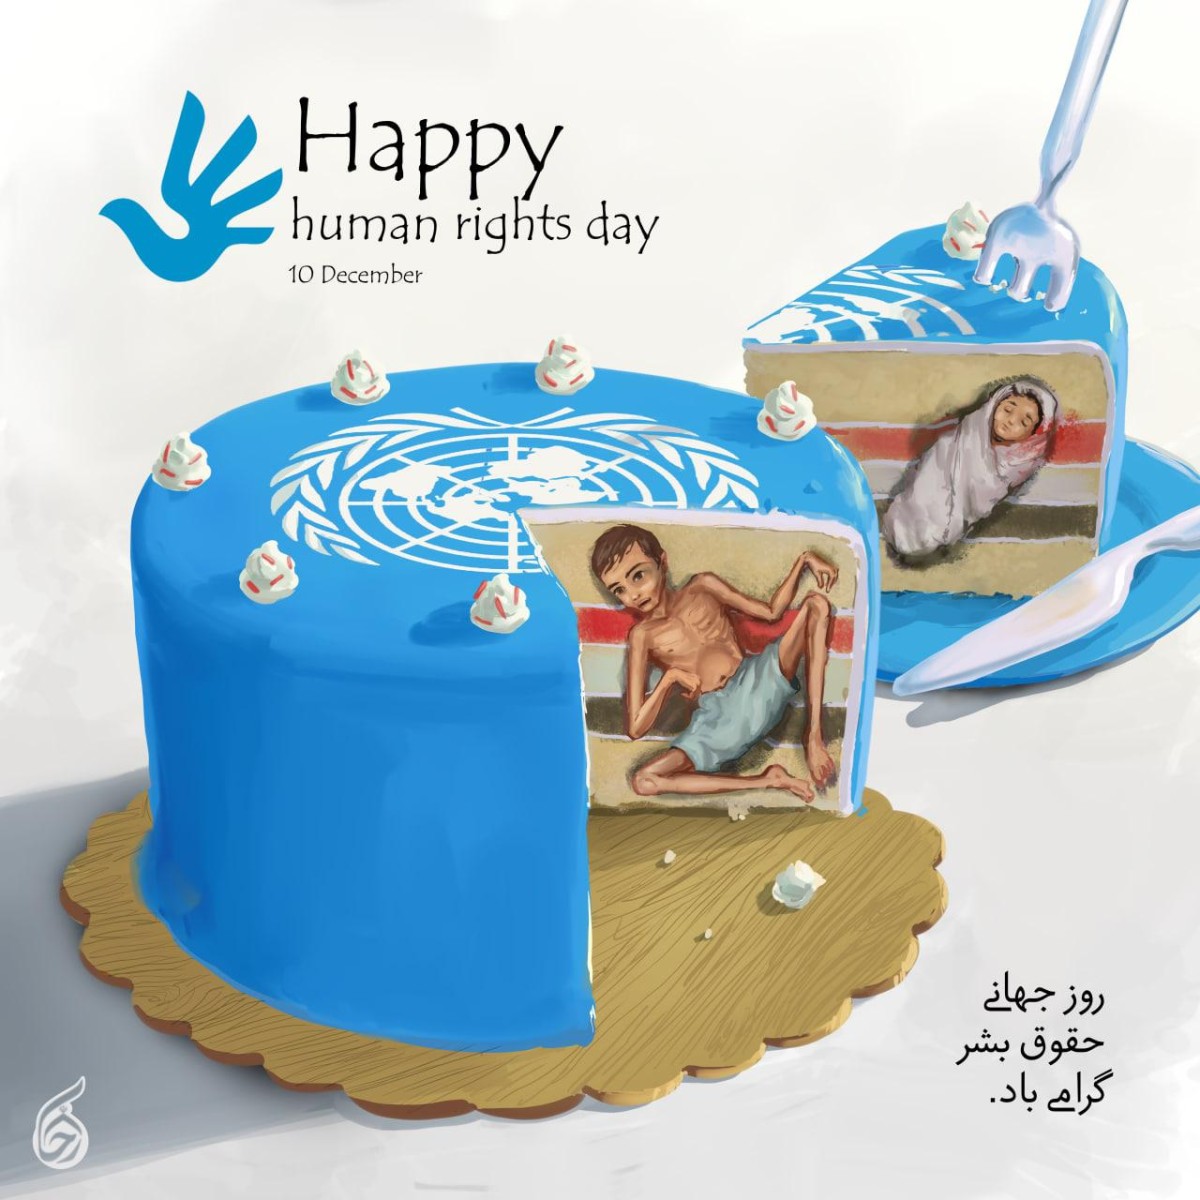 Happy human rights day